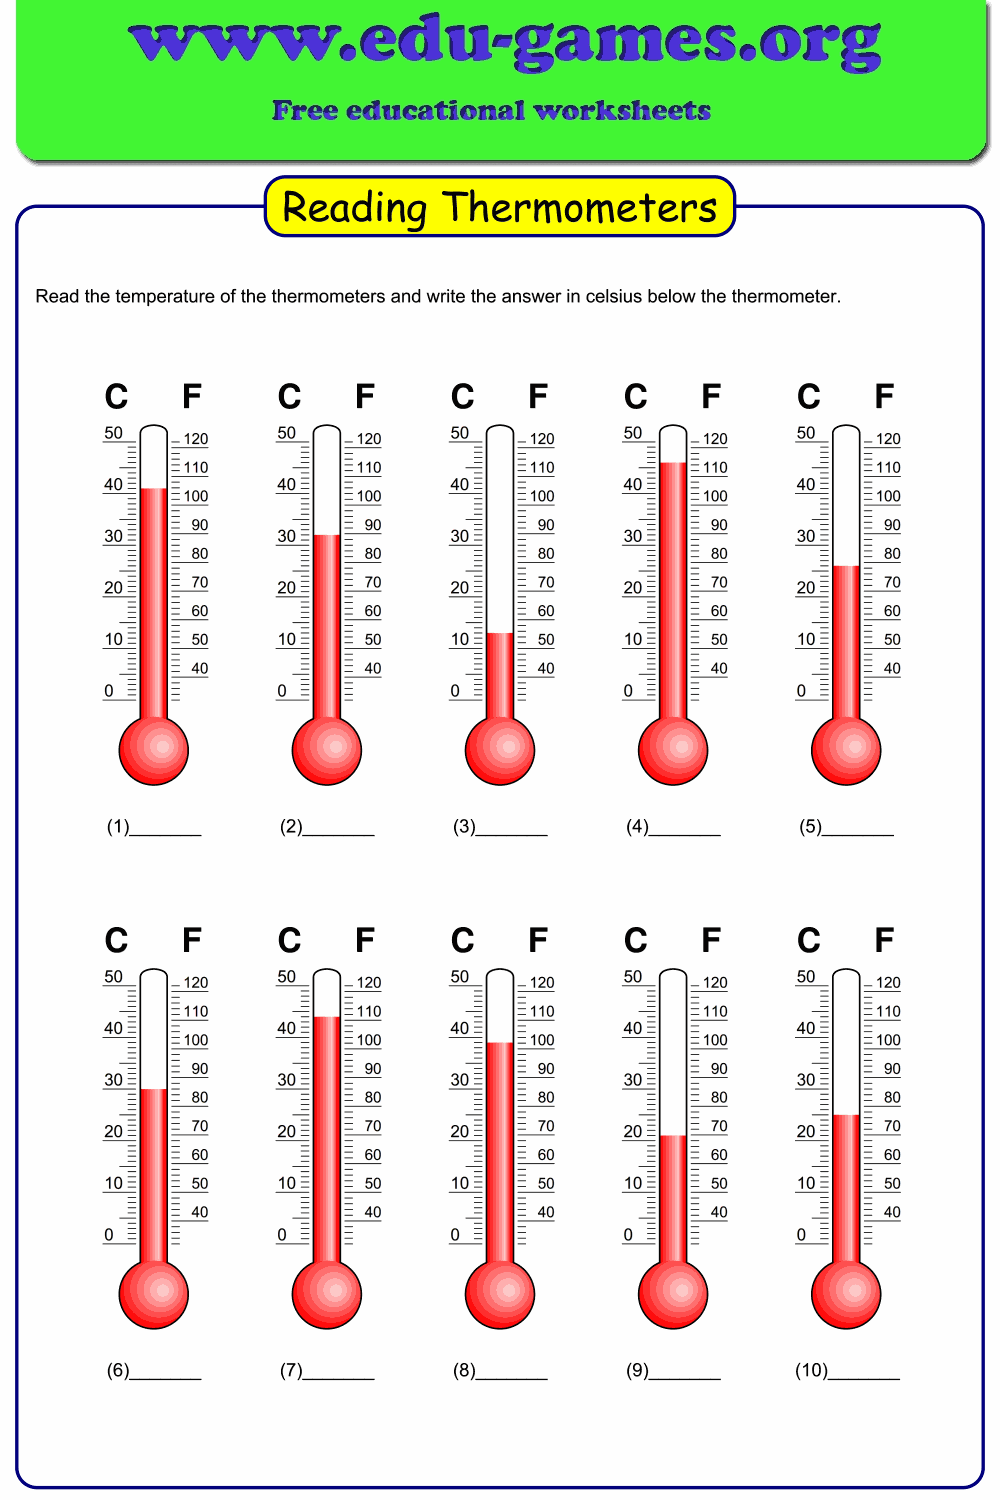 High Quality Reading Thermometers Worksheet With Many Options Celcius Or Fahrenheit Only Temperatures Above 0 O Thermometer Worksheets Educational Worksheets